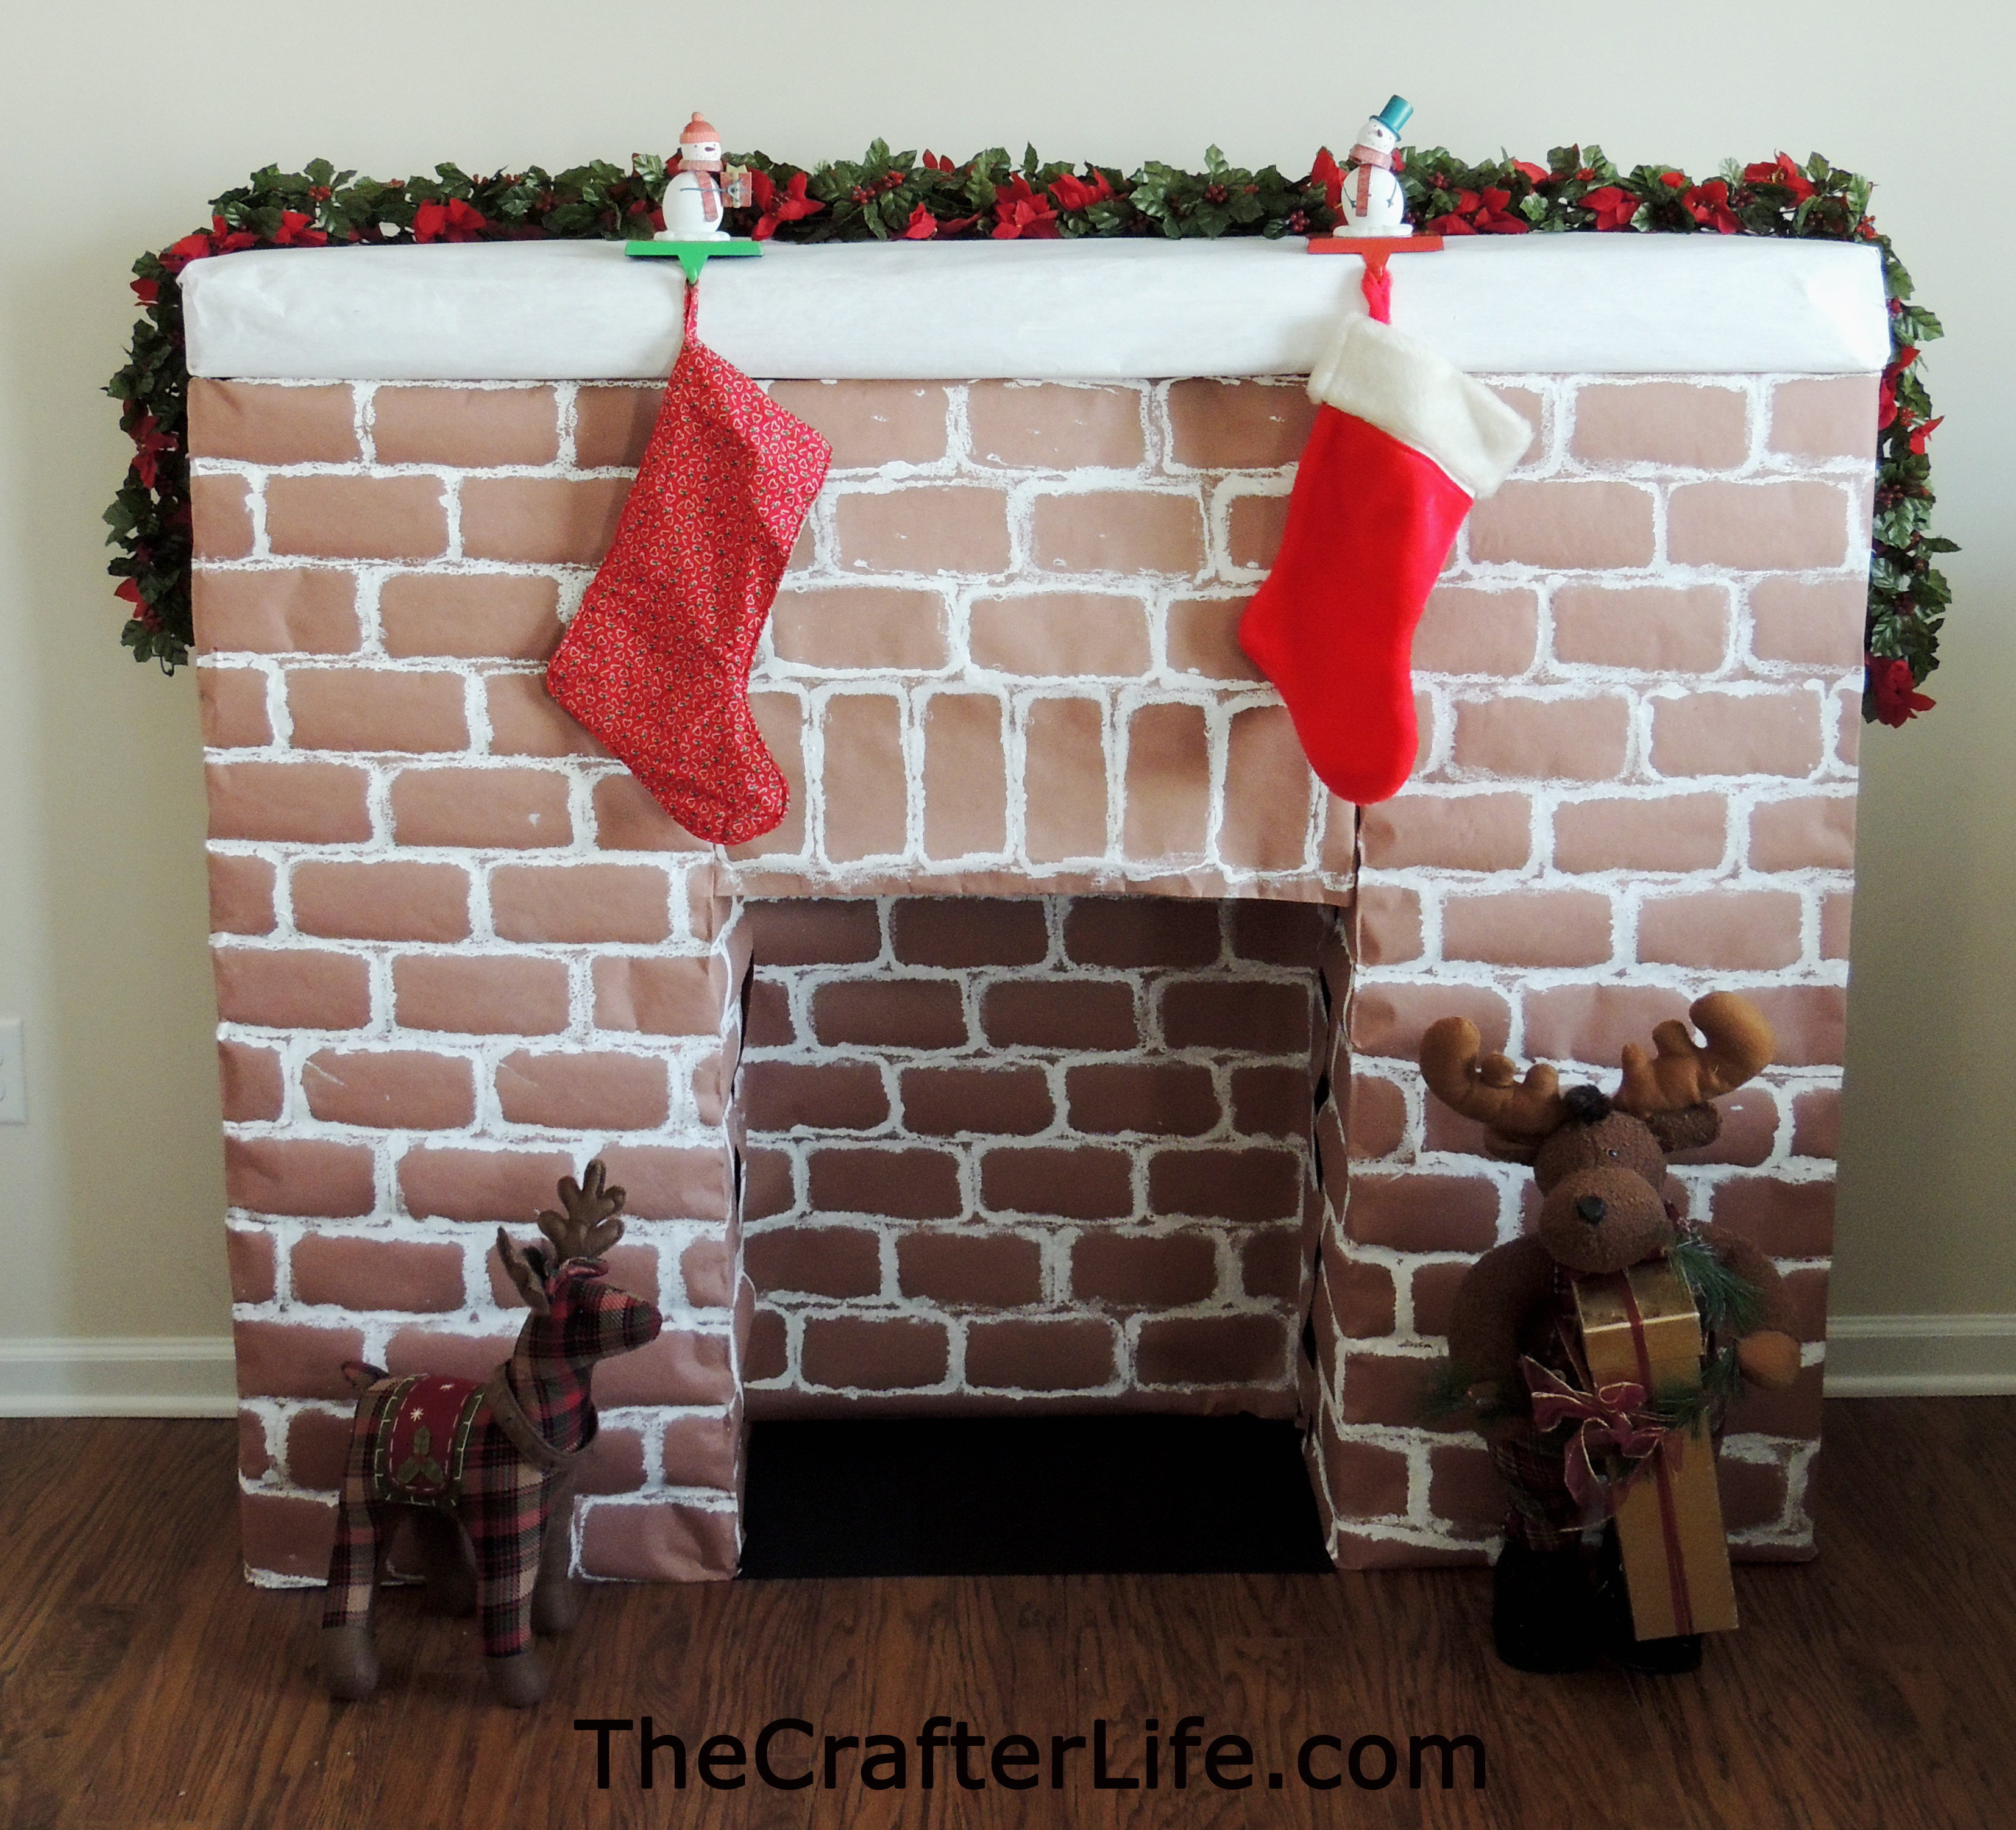 Christmas Corrugated Fireplace Brick Paper
 Cardboard Fireplace The Crafter Life